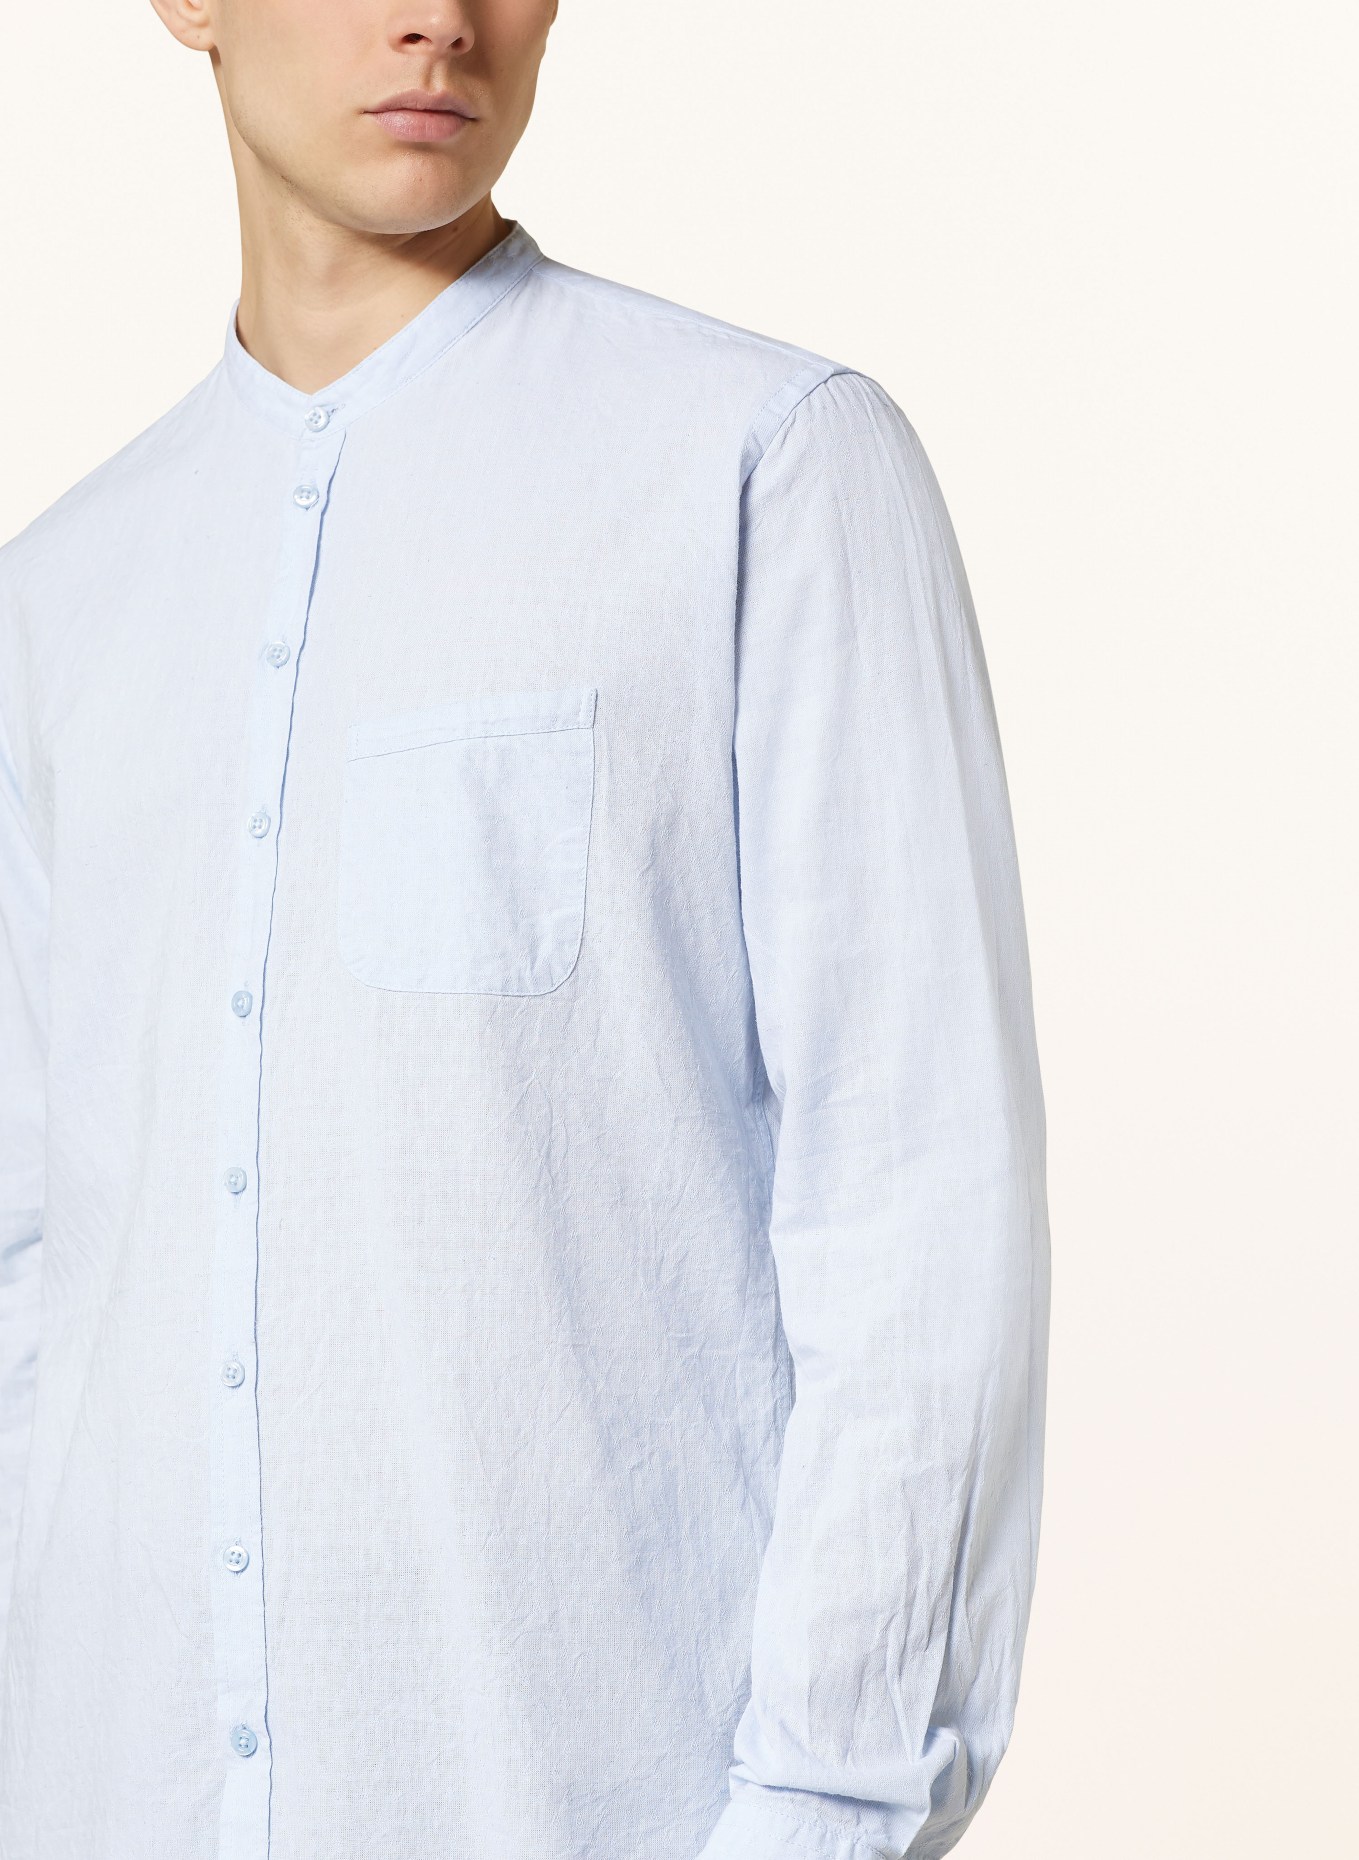 Q1 Manufaktur Shirt slim relaxed fit with stand-up collar and linen, Color: LIGHT BLUE (Image 4)